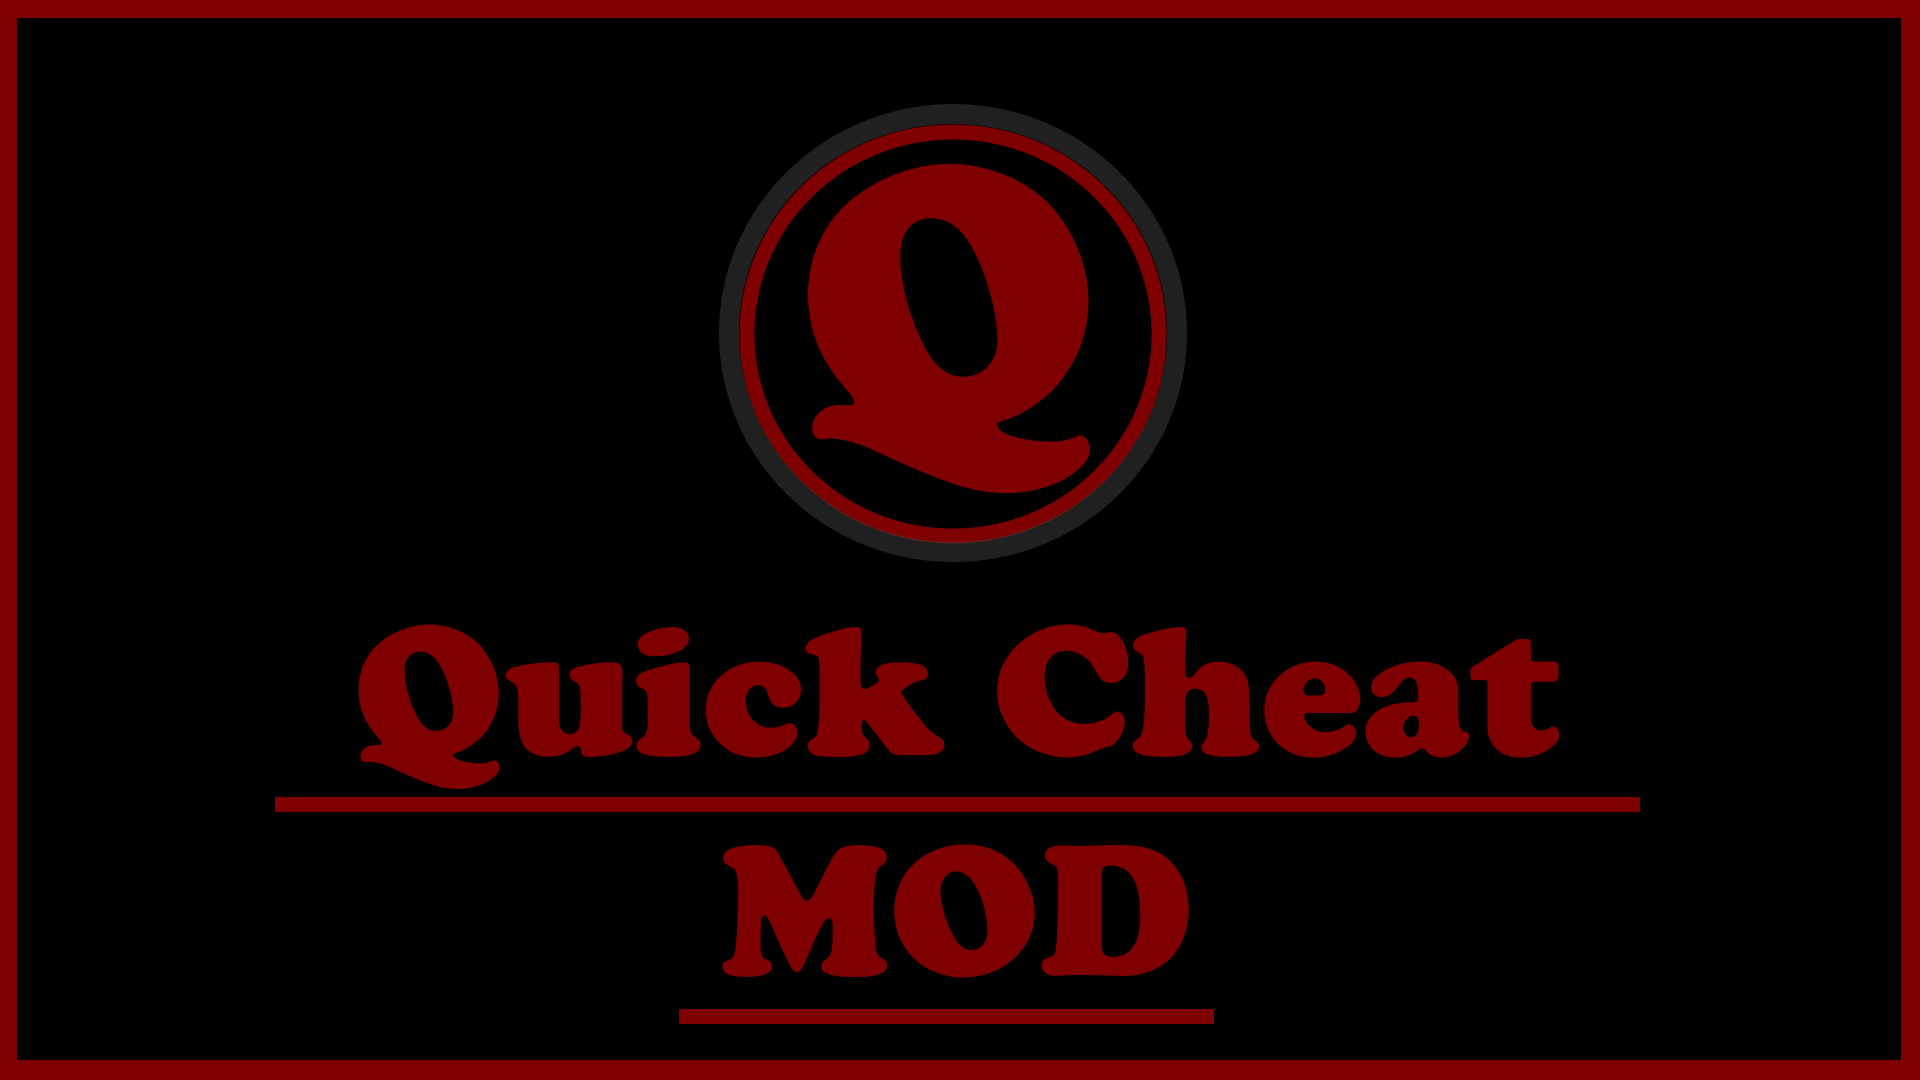 https://media.forgecdn.net/attachments/thumbnails/269/108/310/172/quick-cheat-mod-v2.png